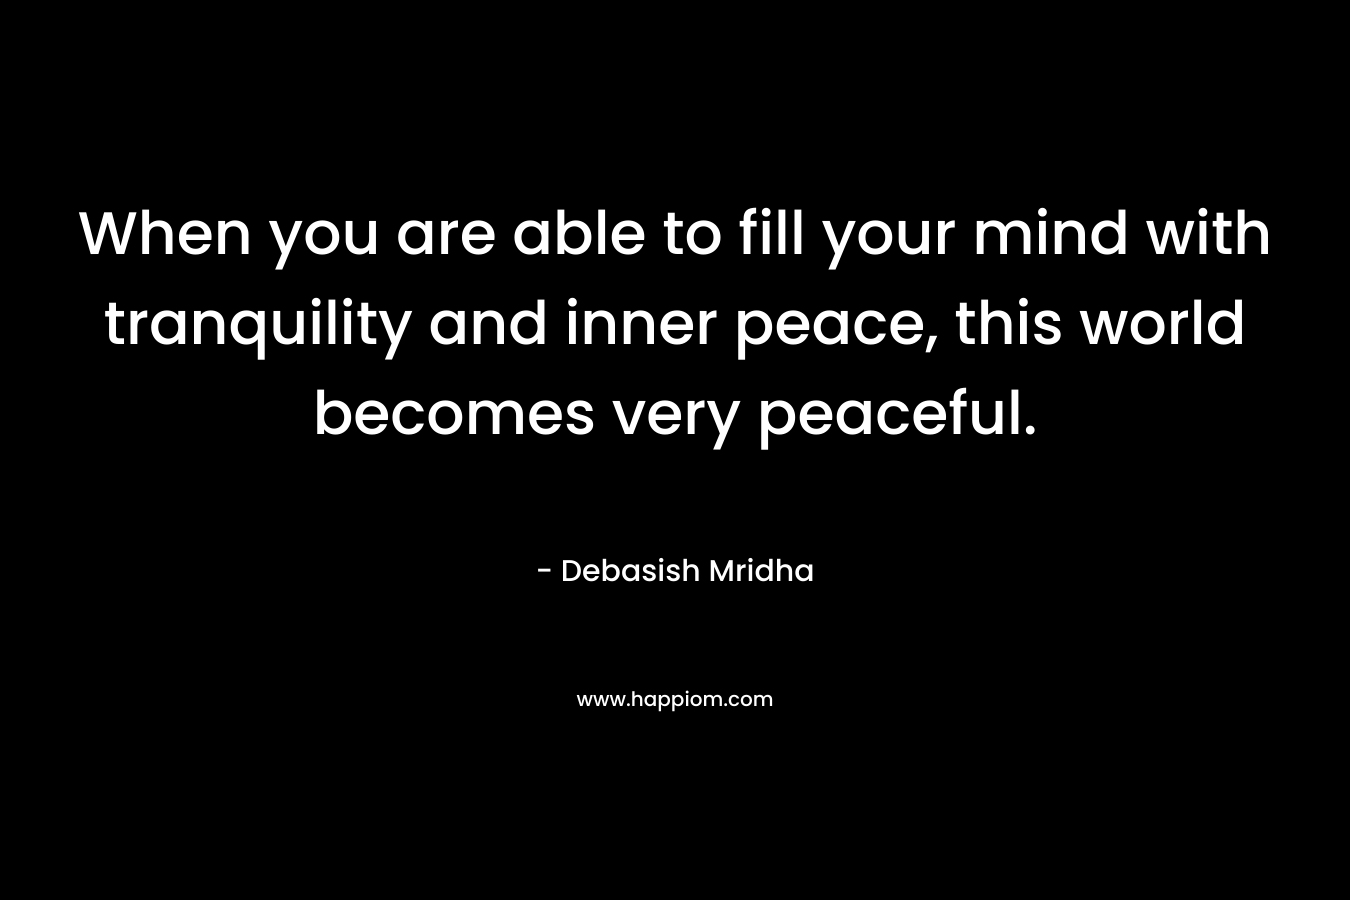 When you are able to fill your mind with tranquility and inner peace, this world becomes very peaceful.